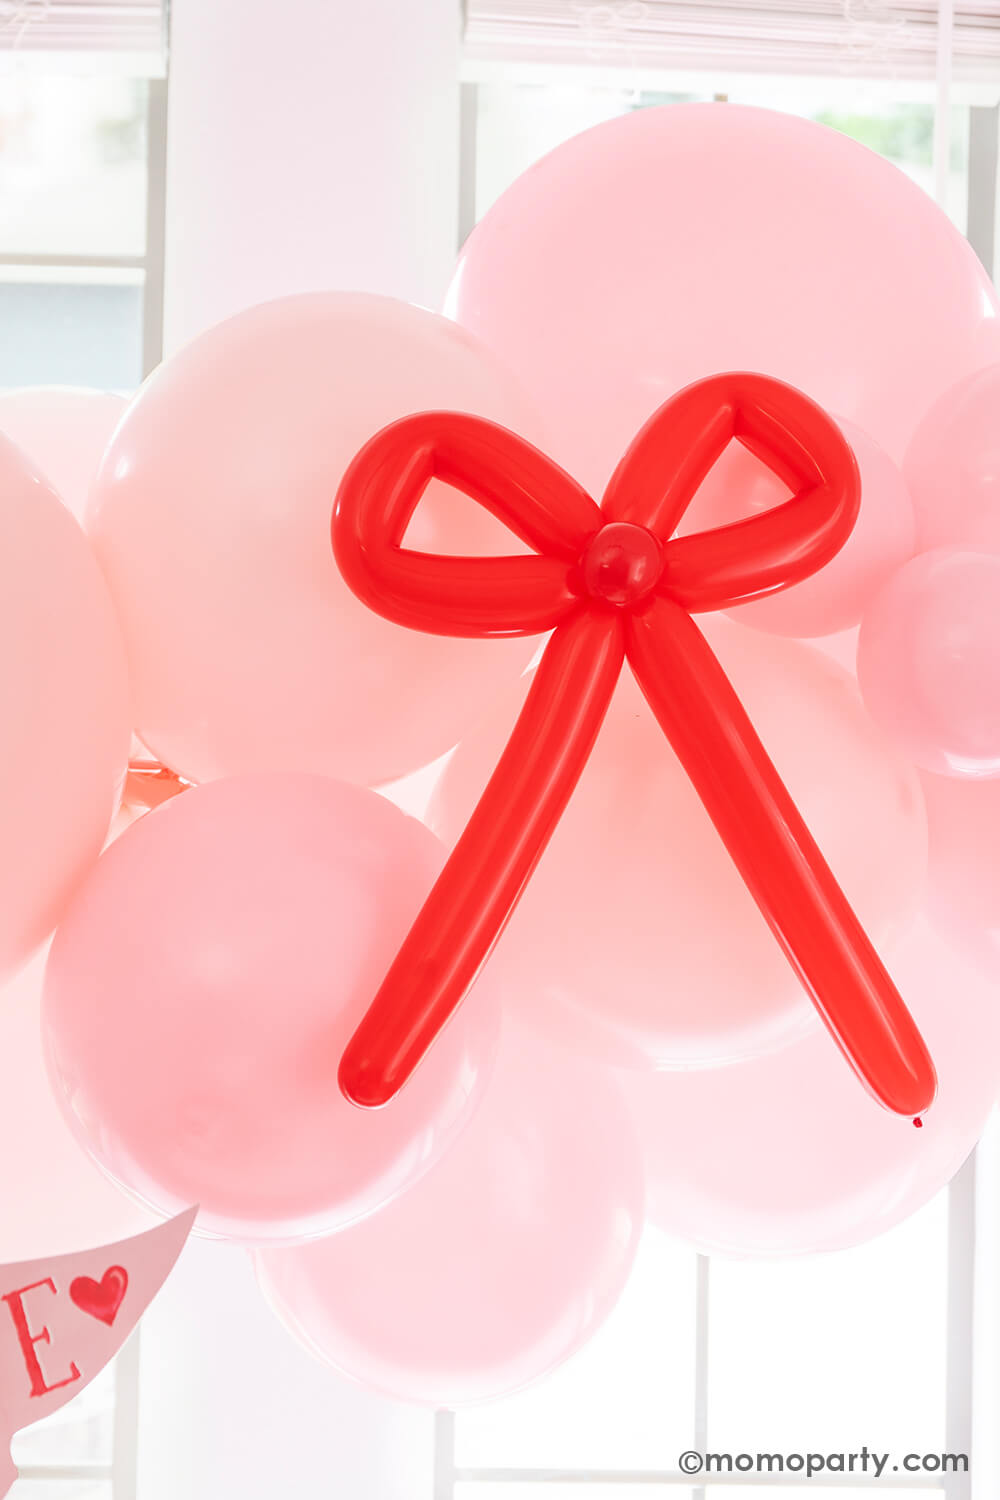 A close up shot of Momo Party's Bow-tiful Valentine's Day Party Box for 8 guests featuring a pink balloon garland with red bow balloons on it, makes it a perfectly adorable party decoration for your Valentine's Day party or Galentine's Day celebration / gathering.